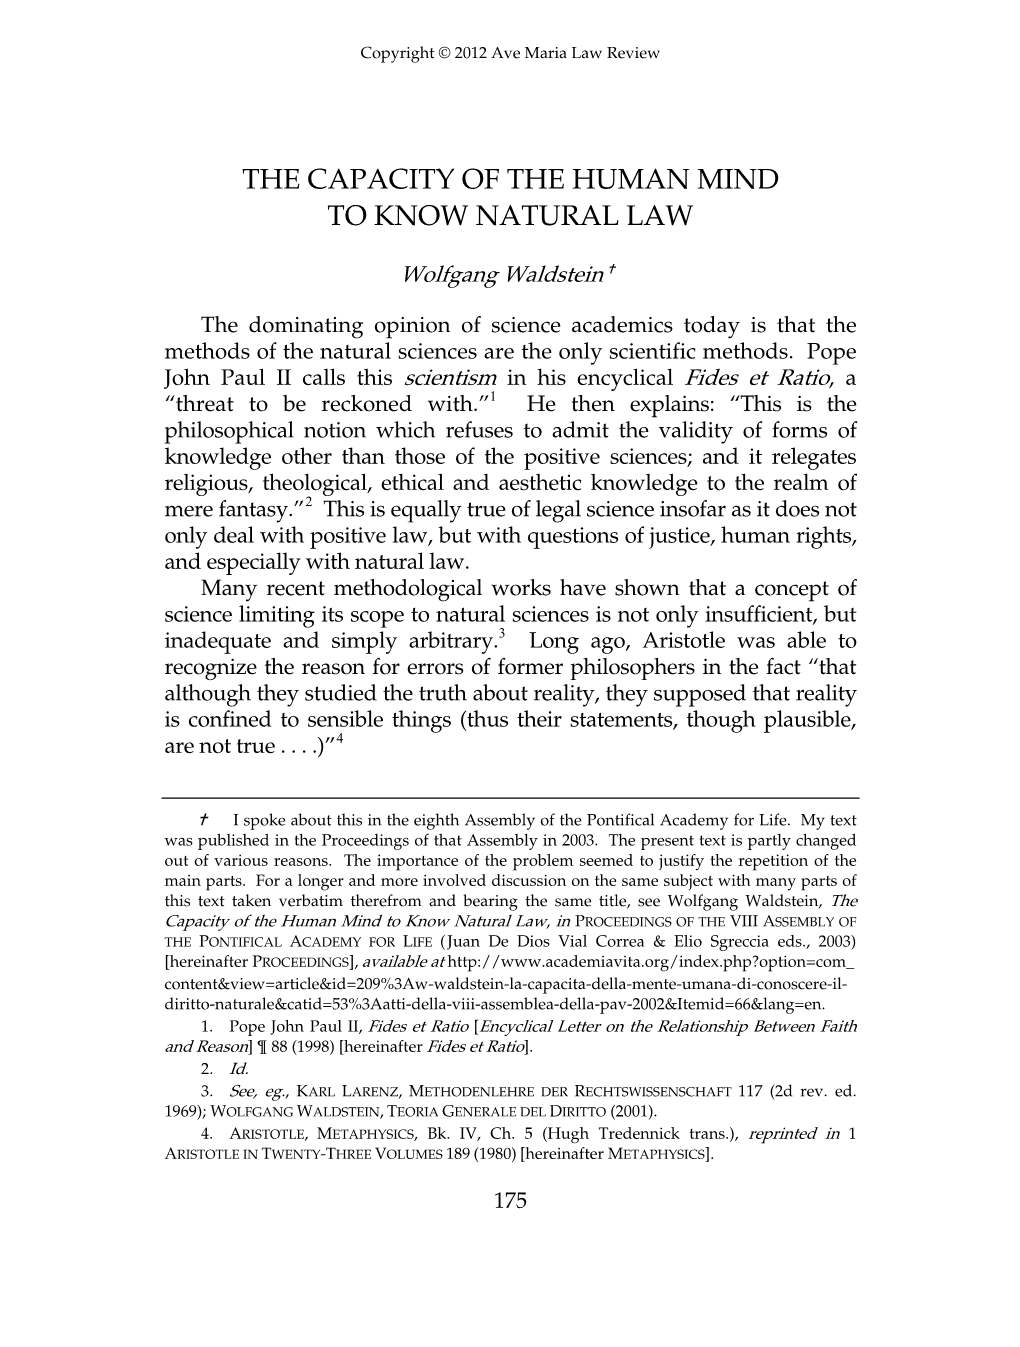 The Capacity of the Human Mind to Know Natural Law